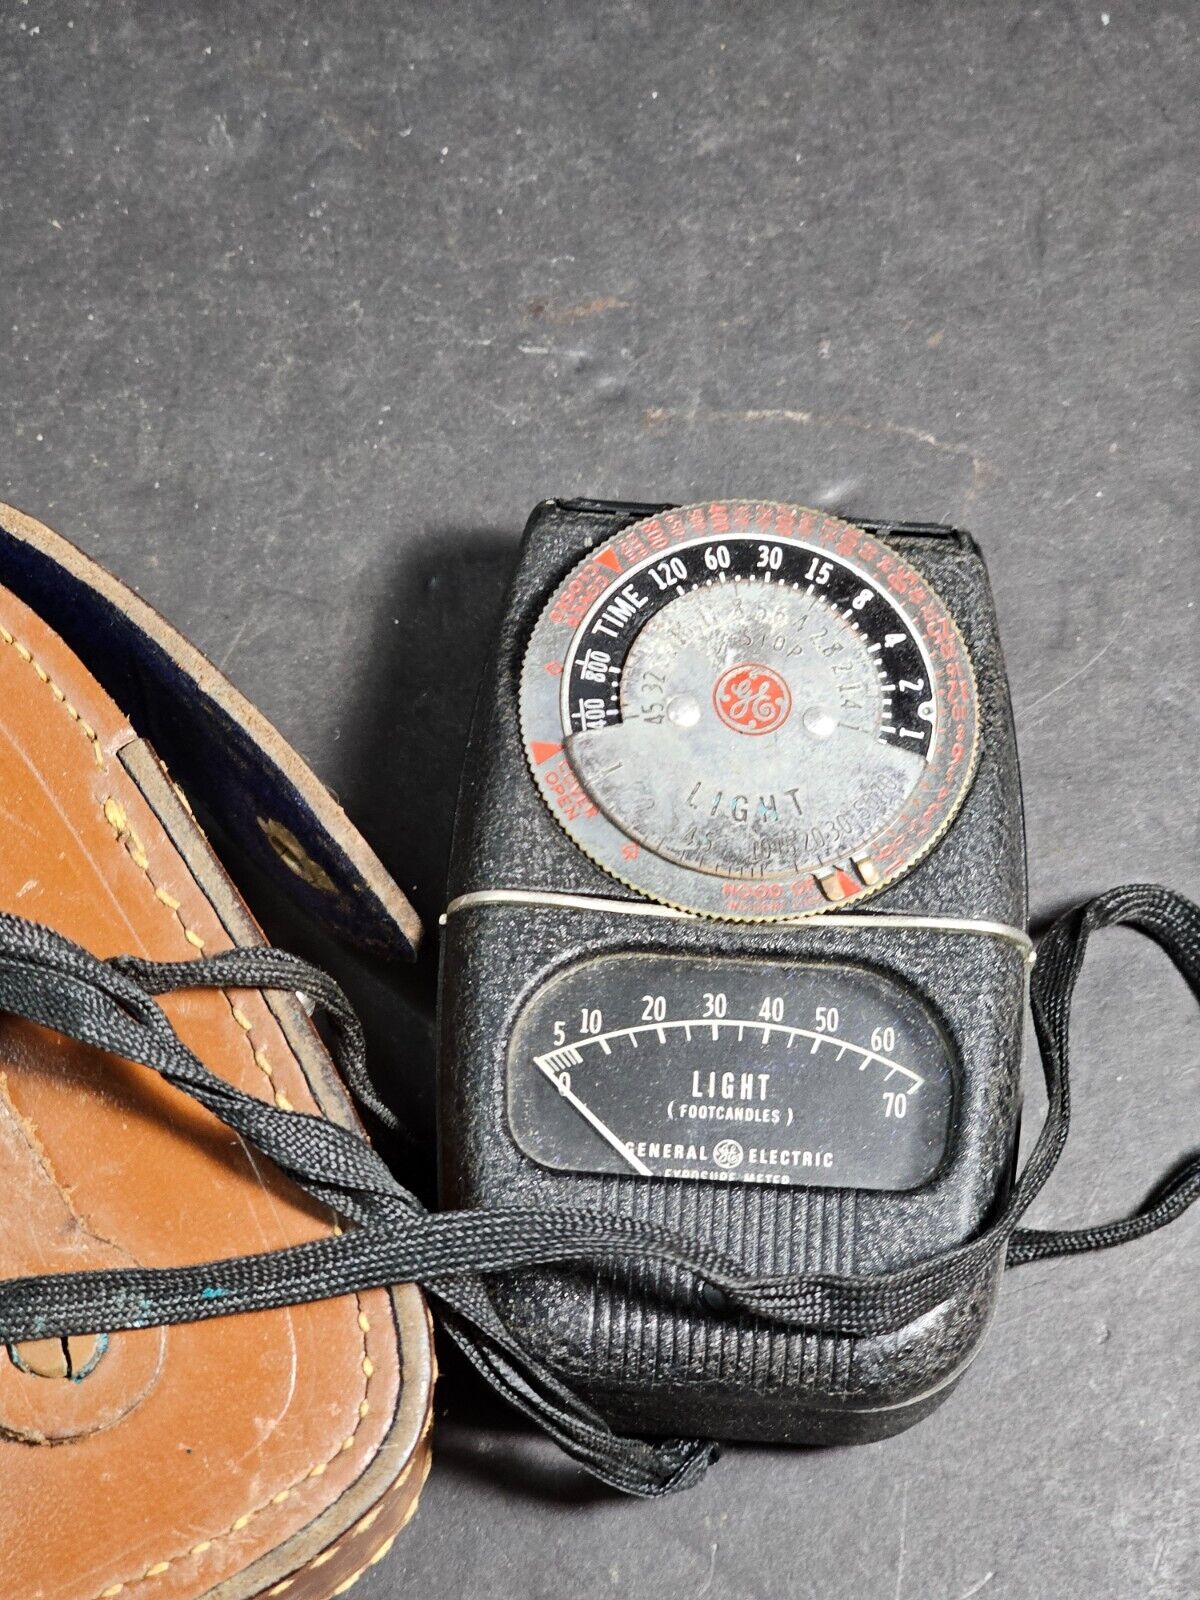 1950s light meter for photography work. great piece of history 3x5.